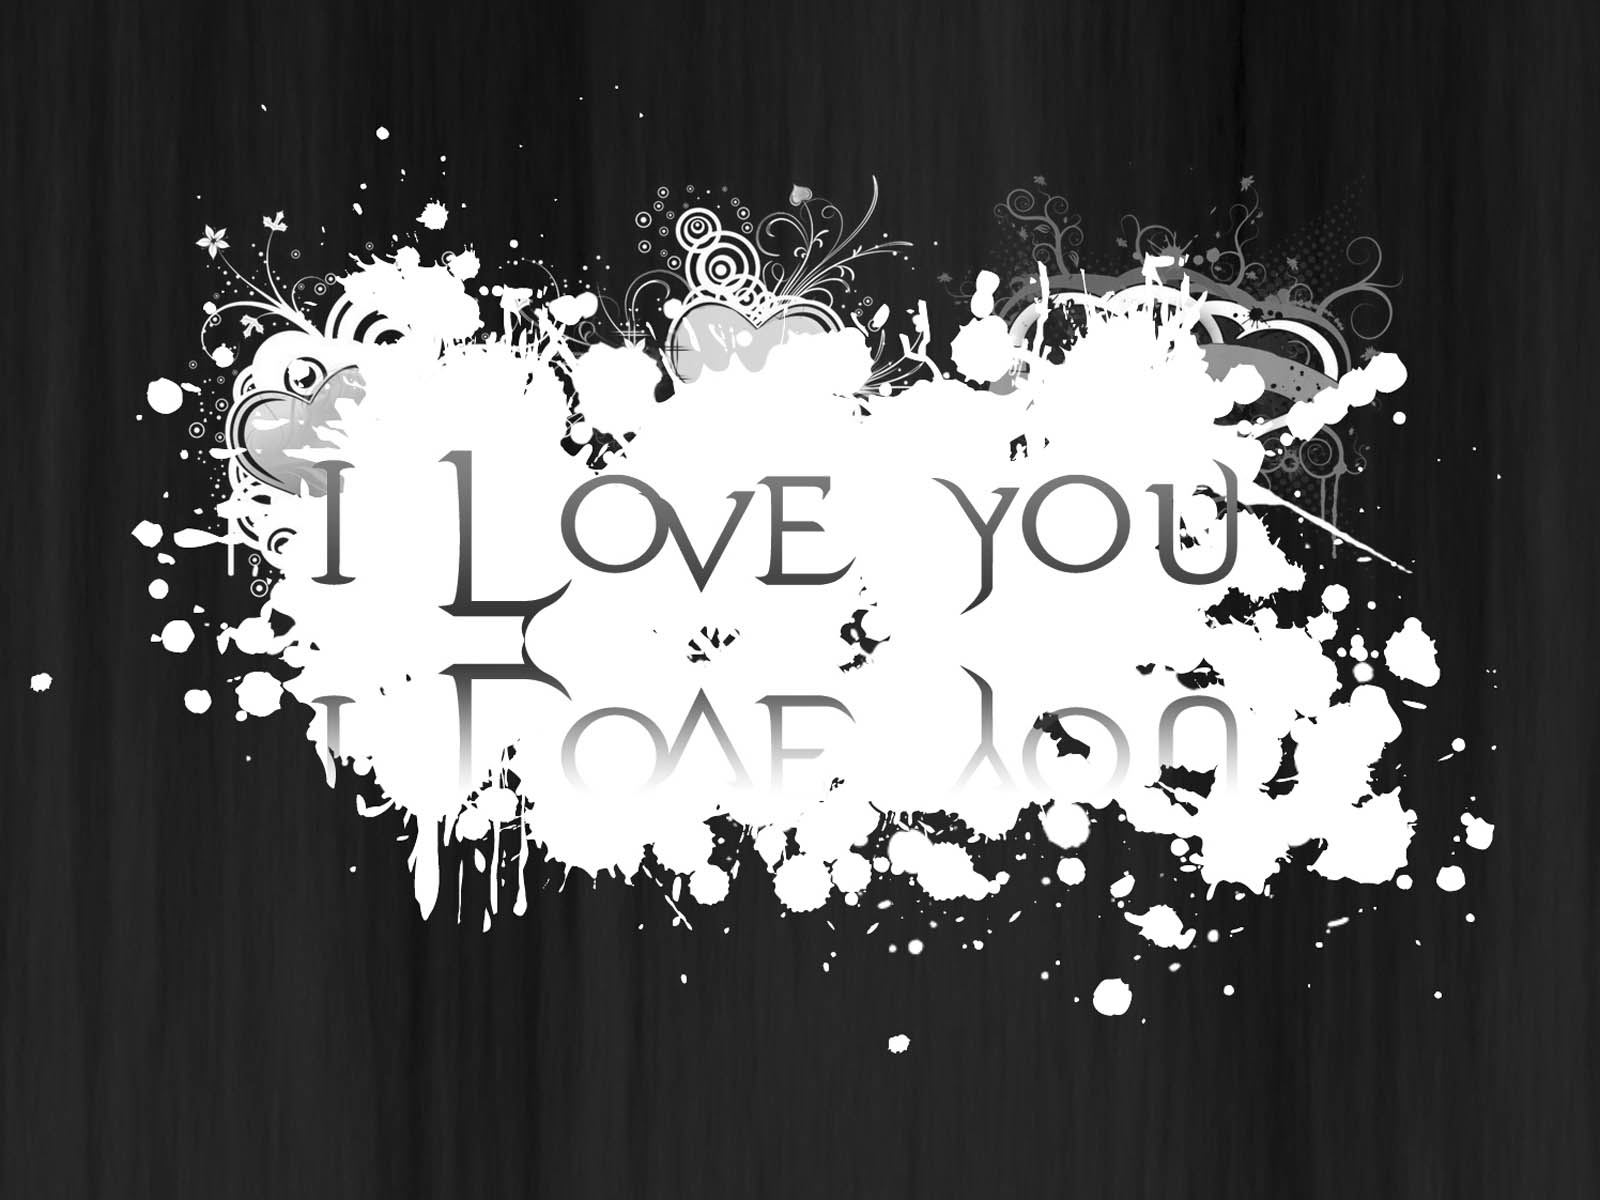 True love pictures black and white Amazing Wallpapers